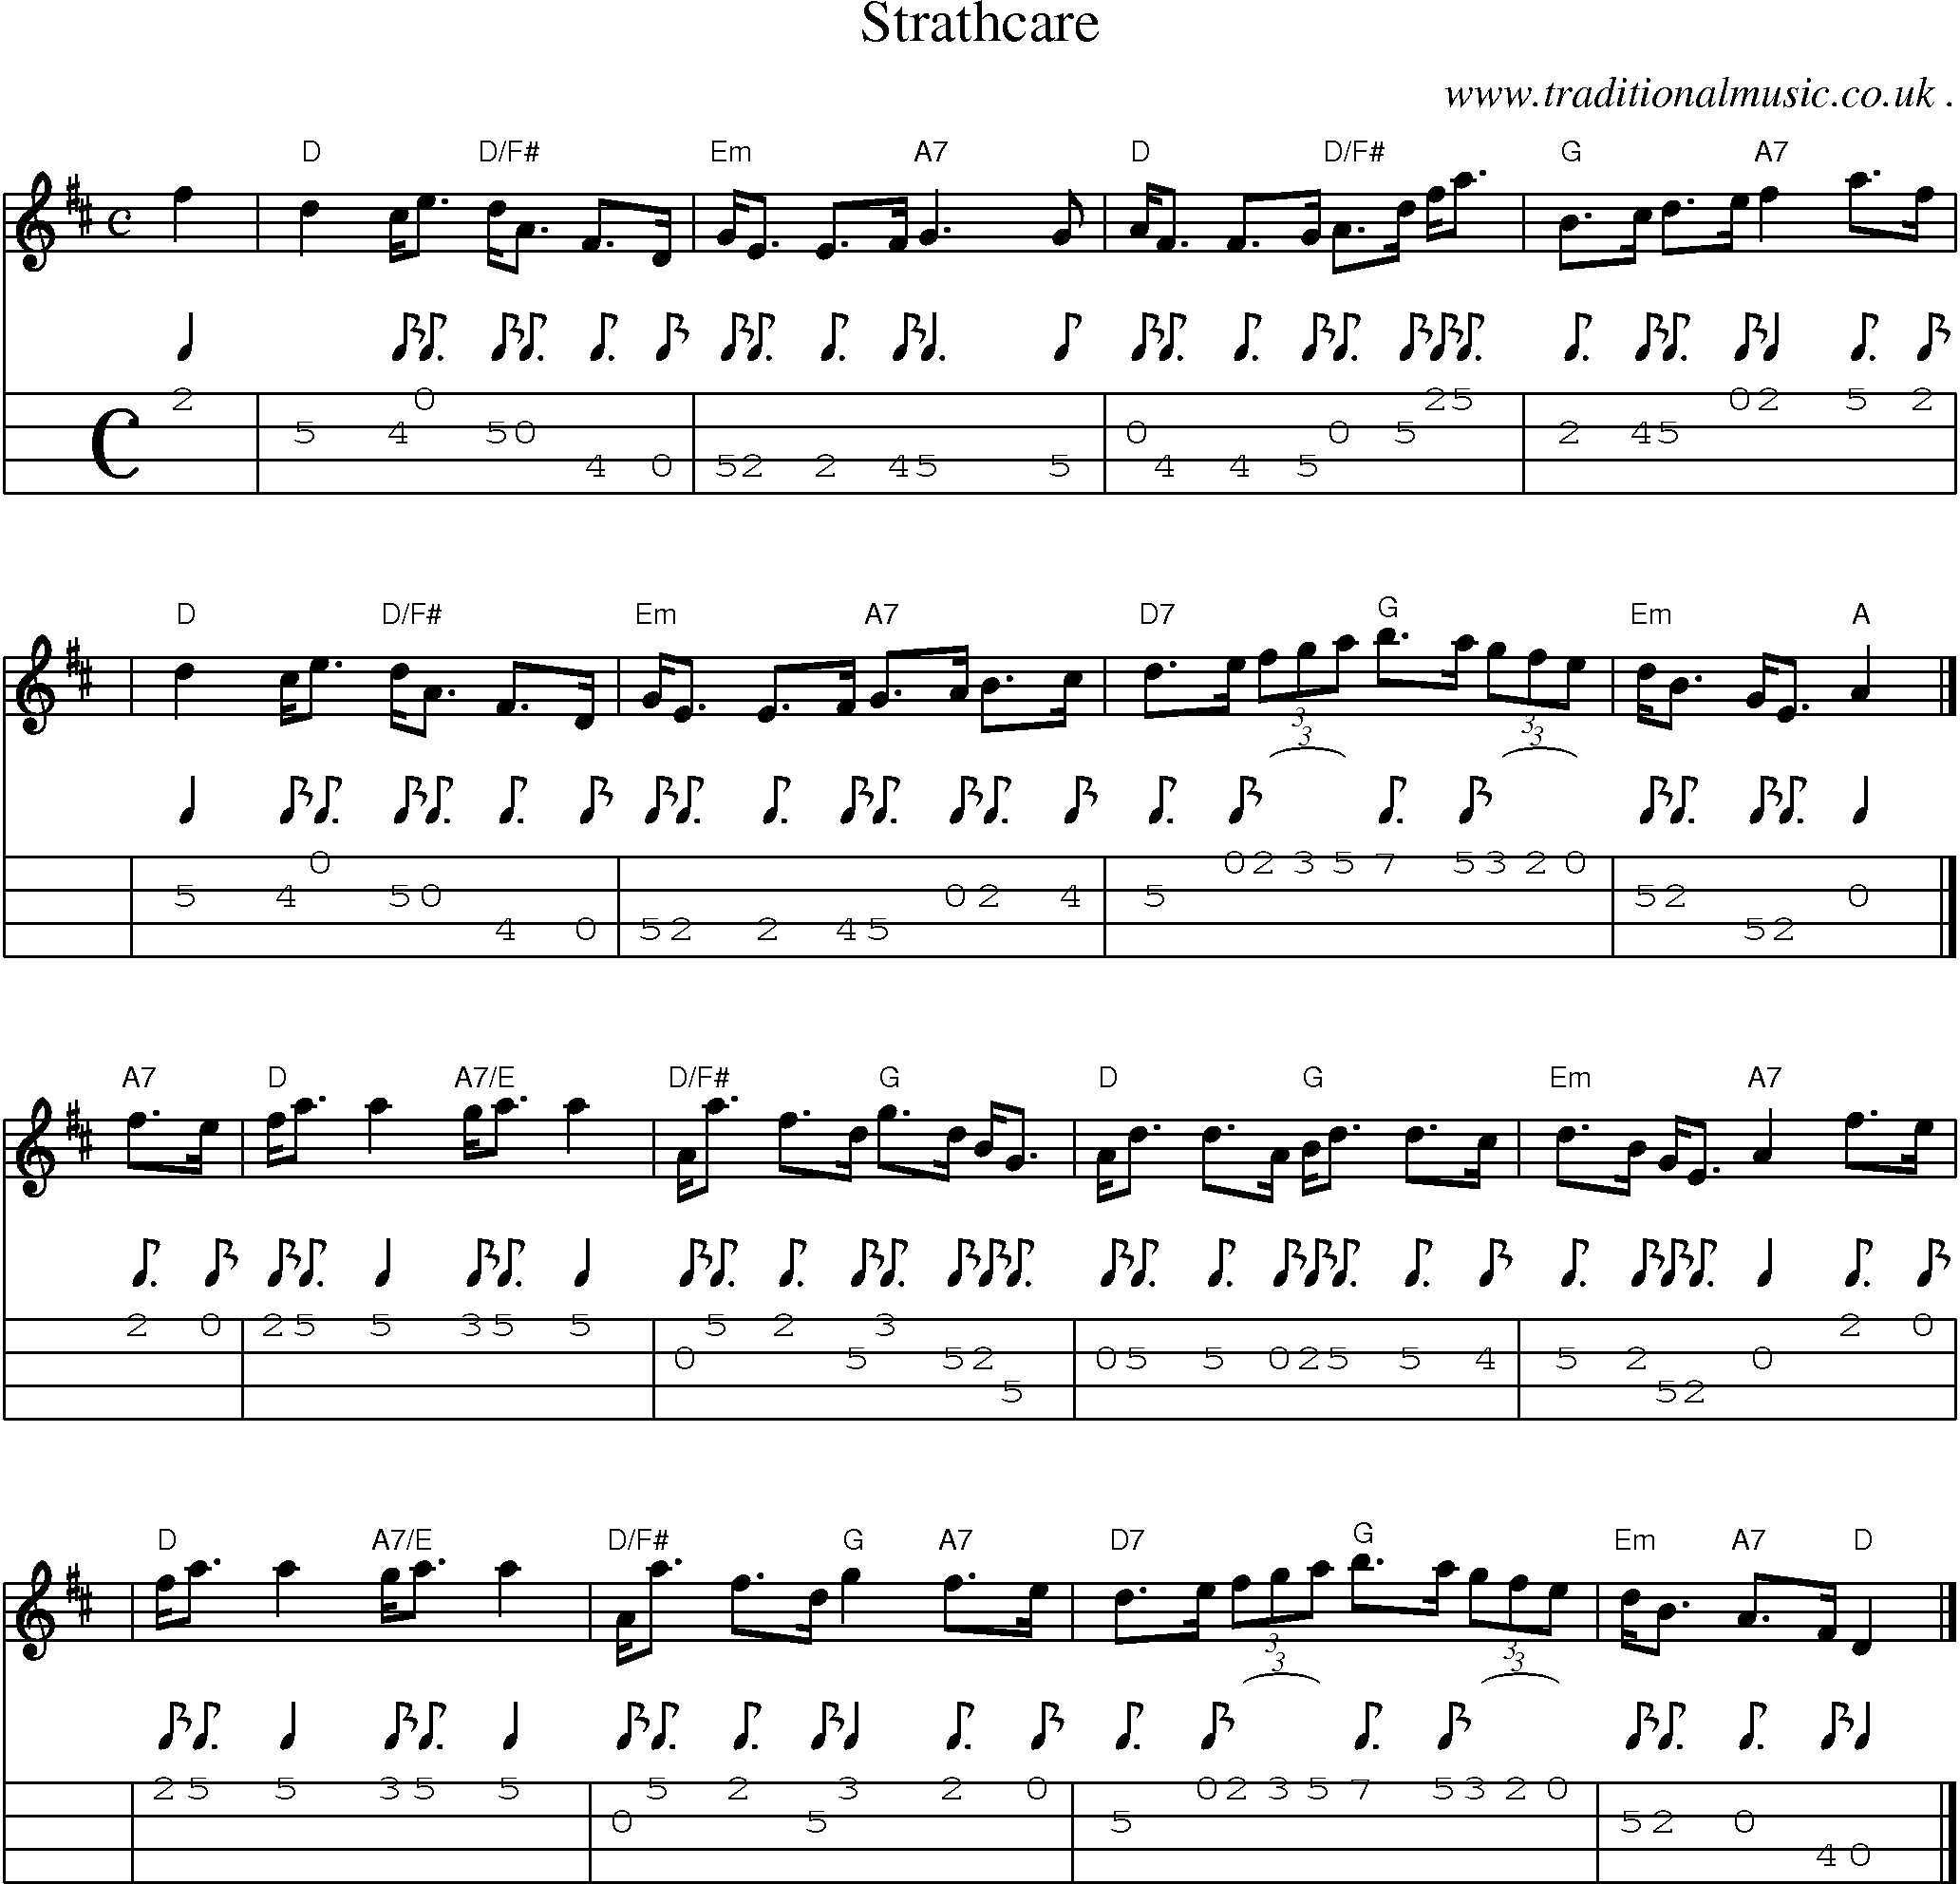 Sheet-music  score, Chords and Mandolin Tabs for Strathcare